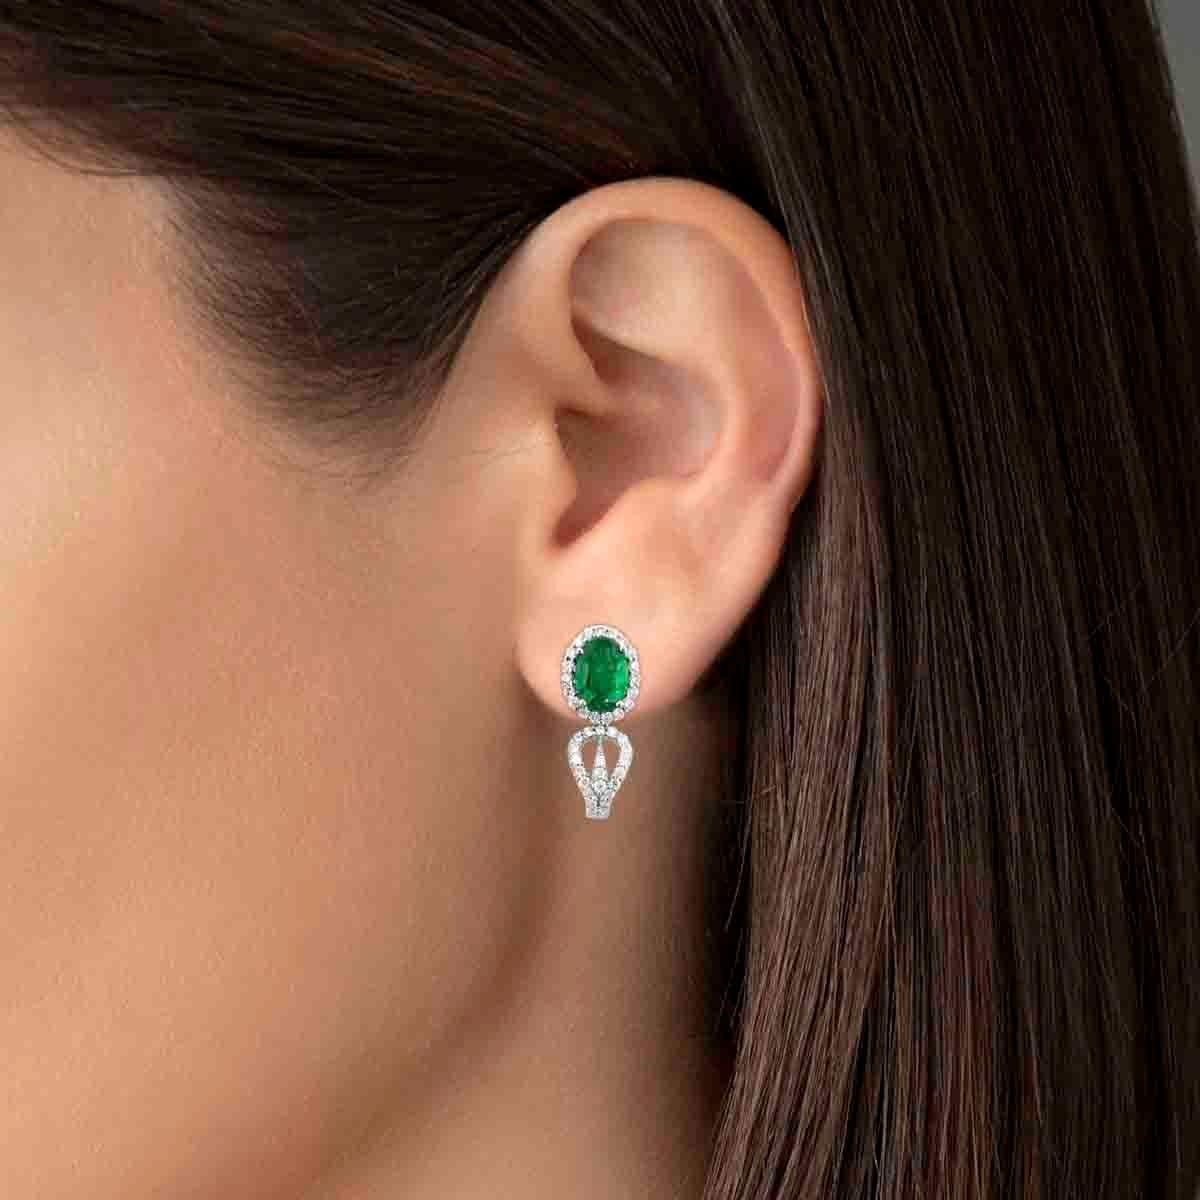 Women's 18K White Gold 1.52cts Emerald and Diamond Earring. Style# TS1023E